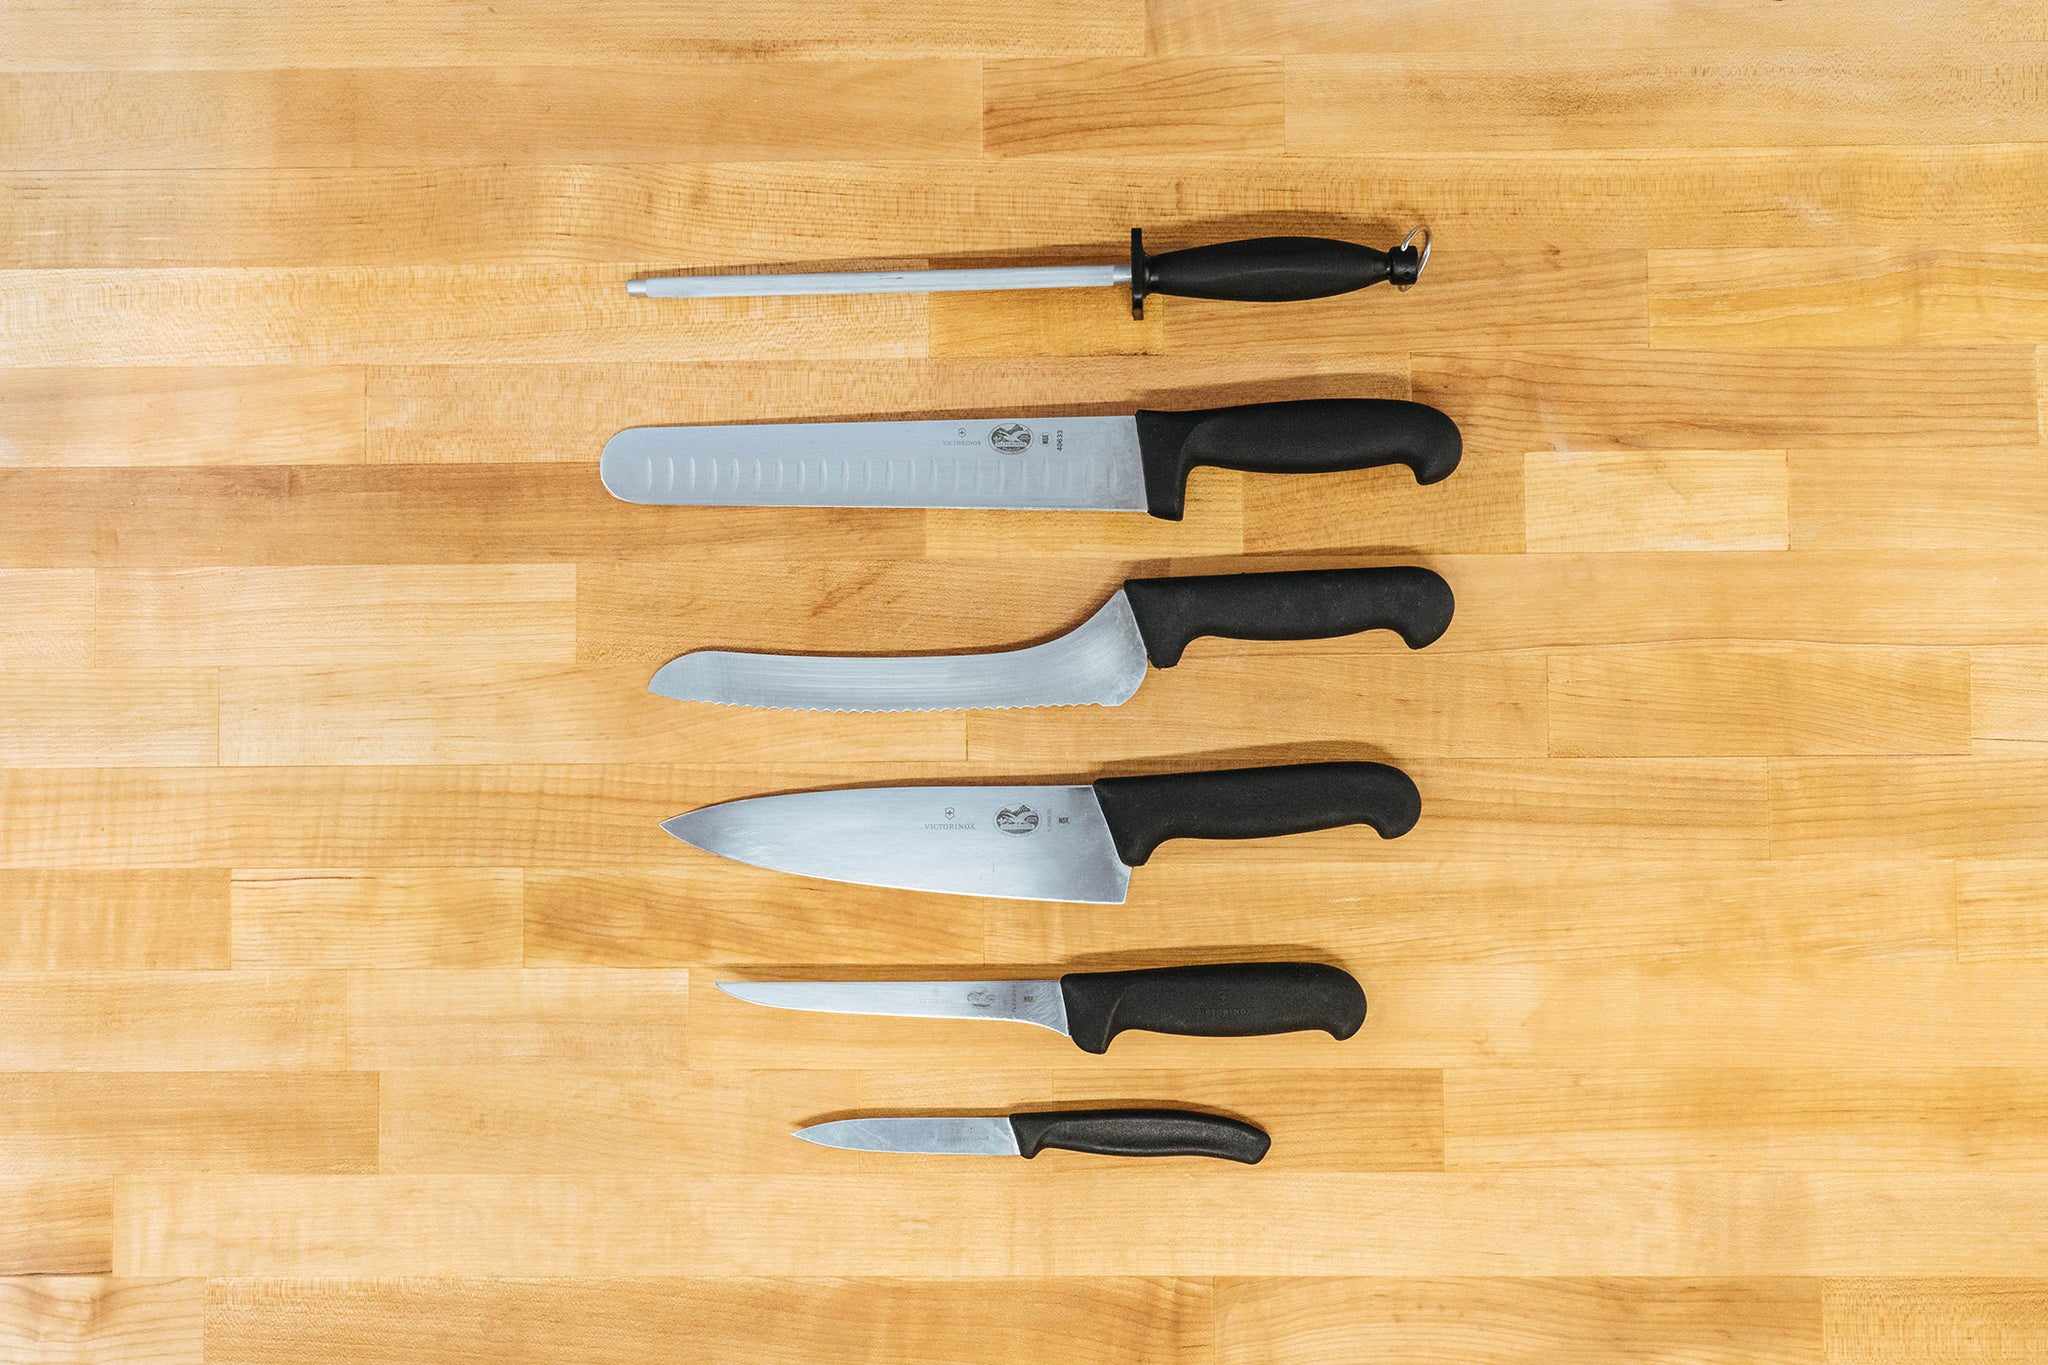 What are different knives and what are they for?